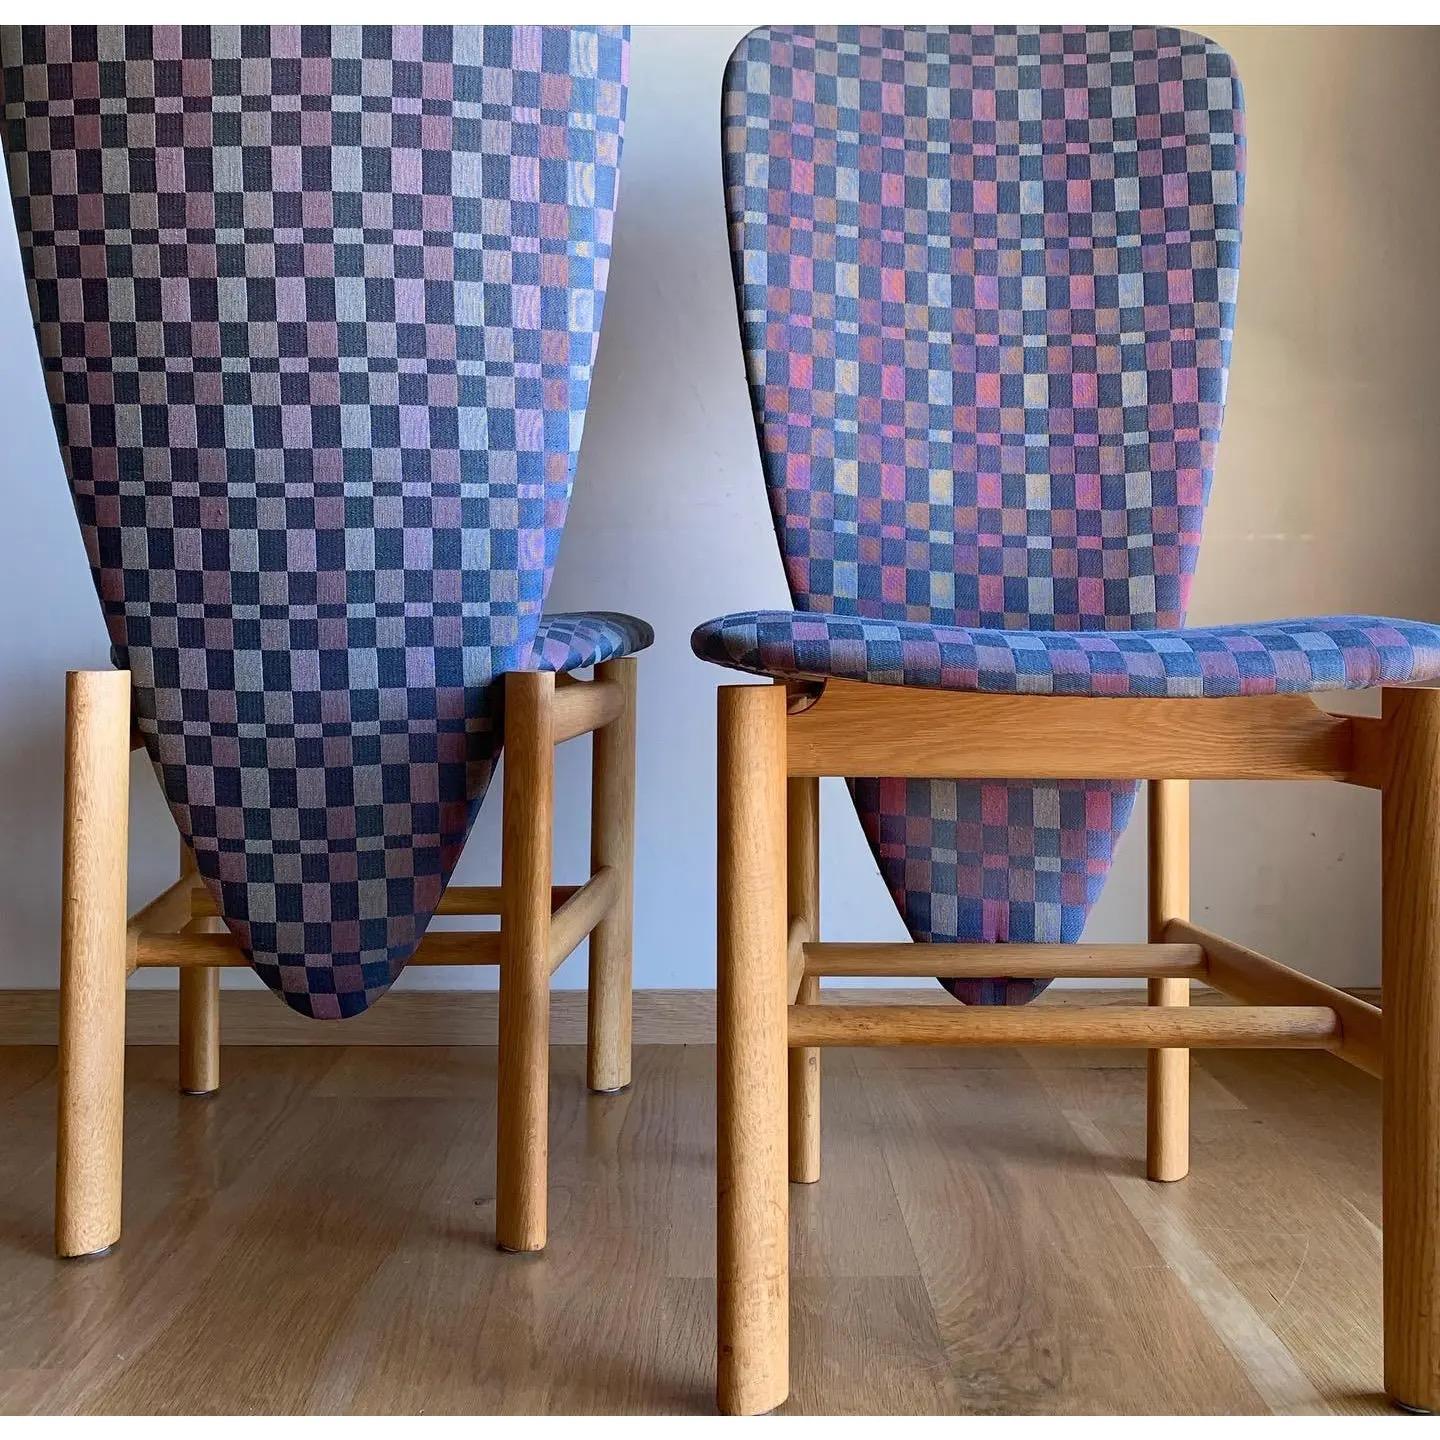 For the groundbreakers and envelope-pushers, a rare and incredible set of Memphis Style high backed dining chairs with elongated abstracted triangular design. Architectural bases are made of solid European white oak.
Stunning and unexpected, these